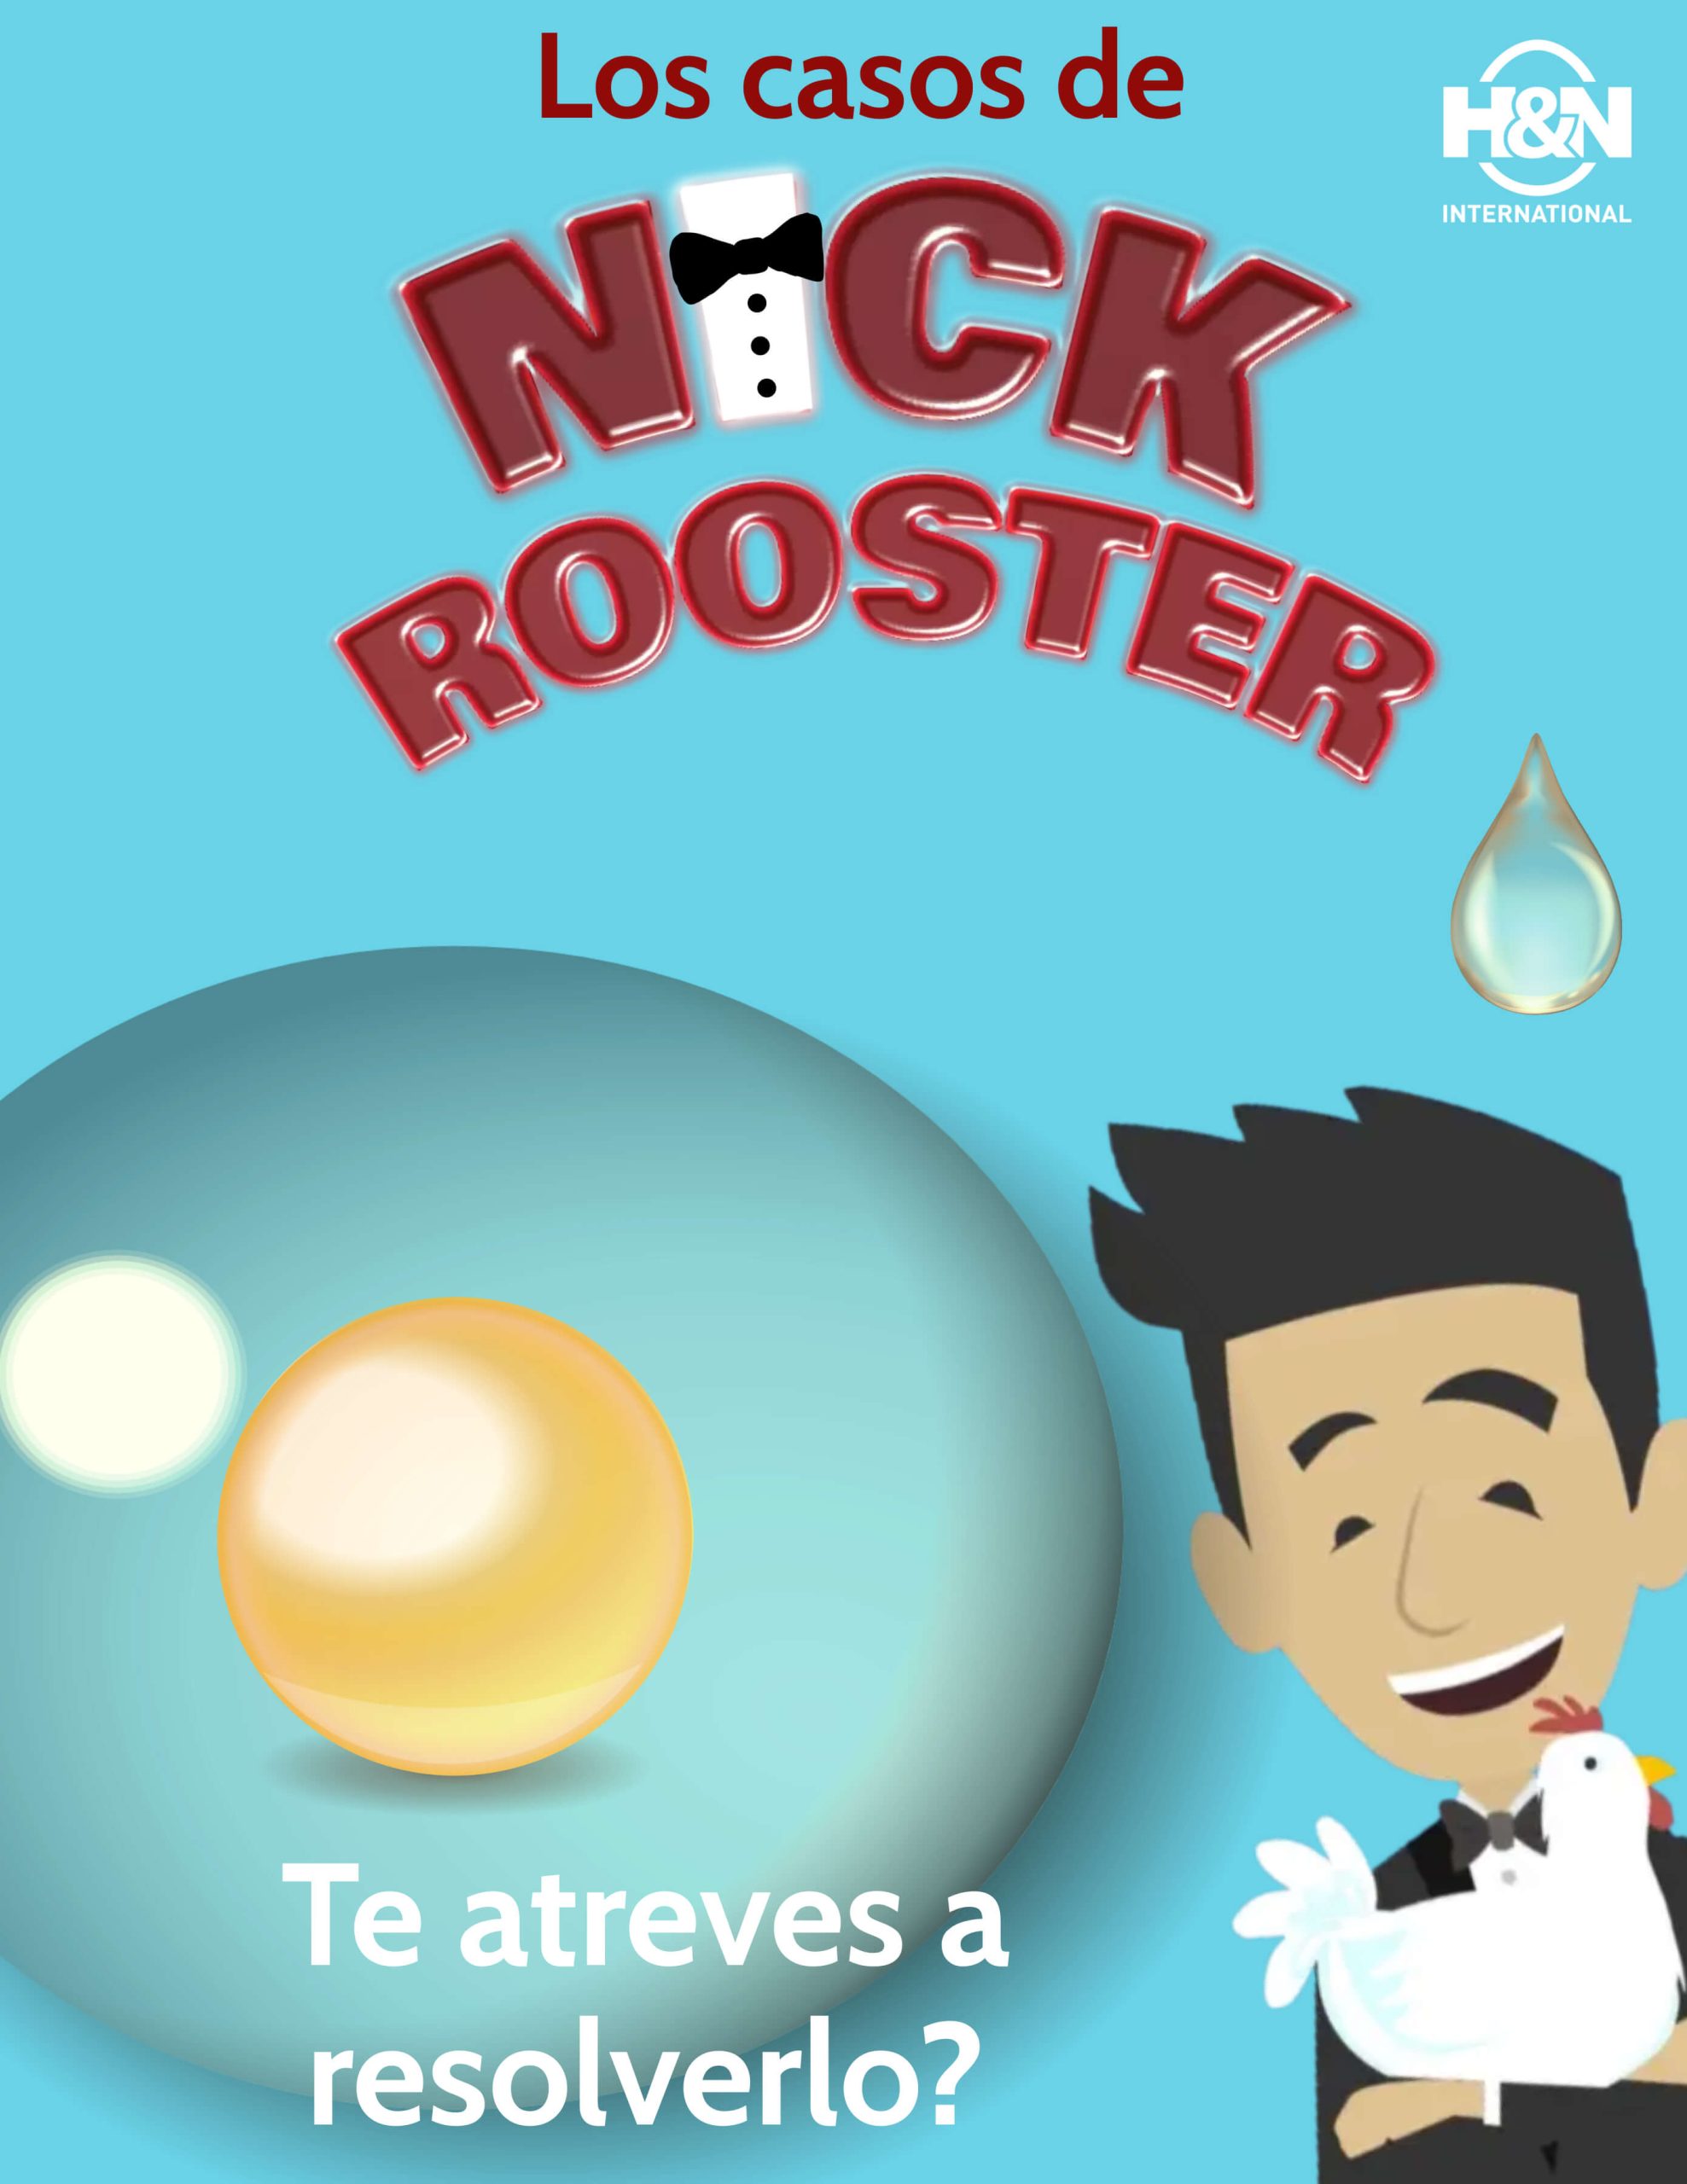 Nick Rooster caso num. 13